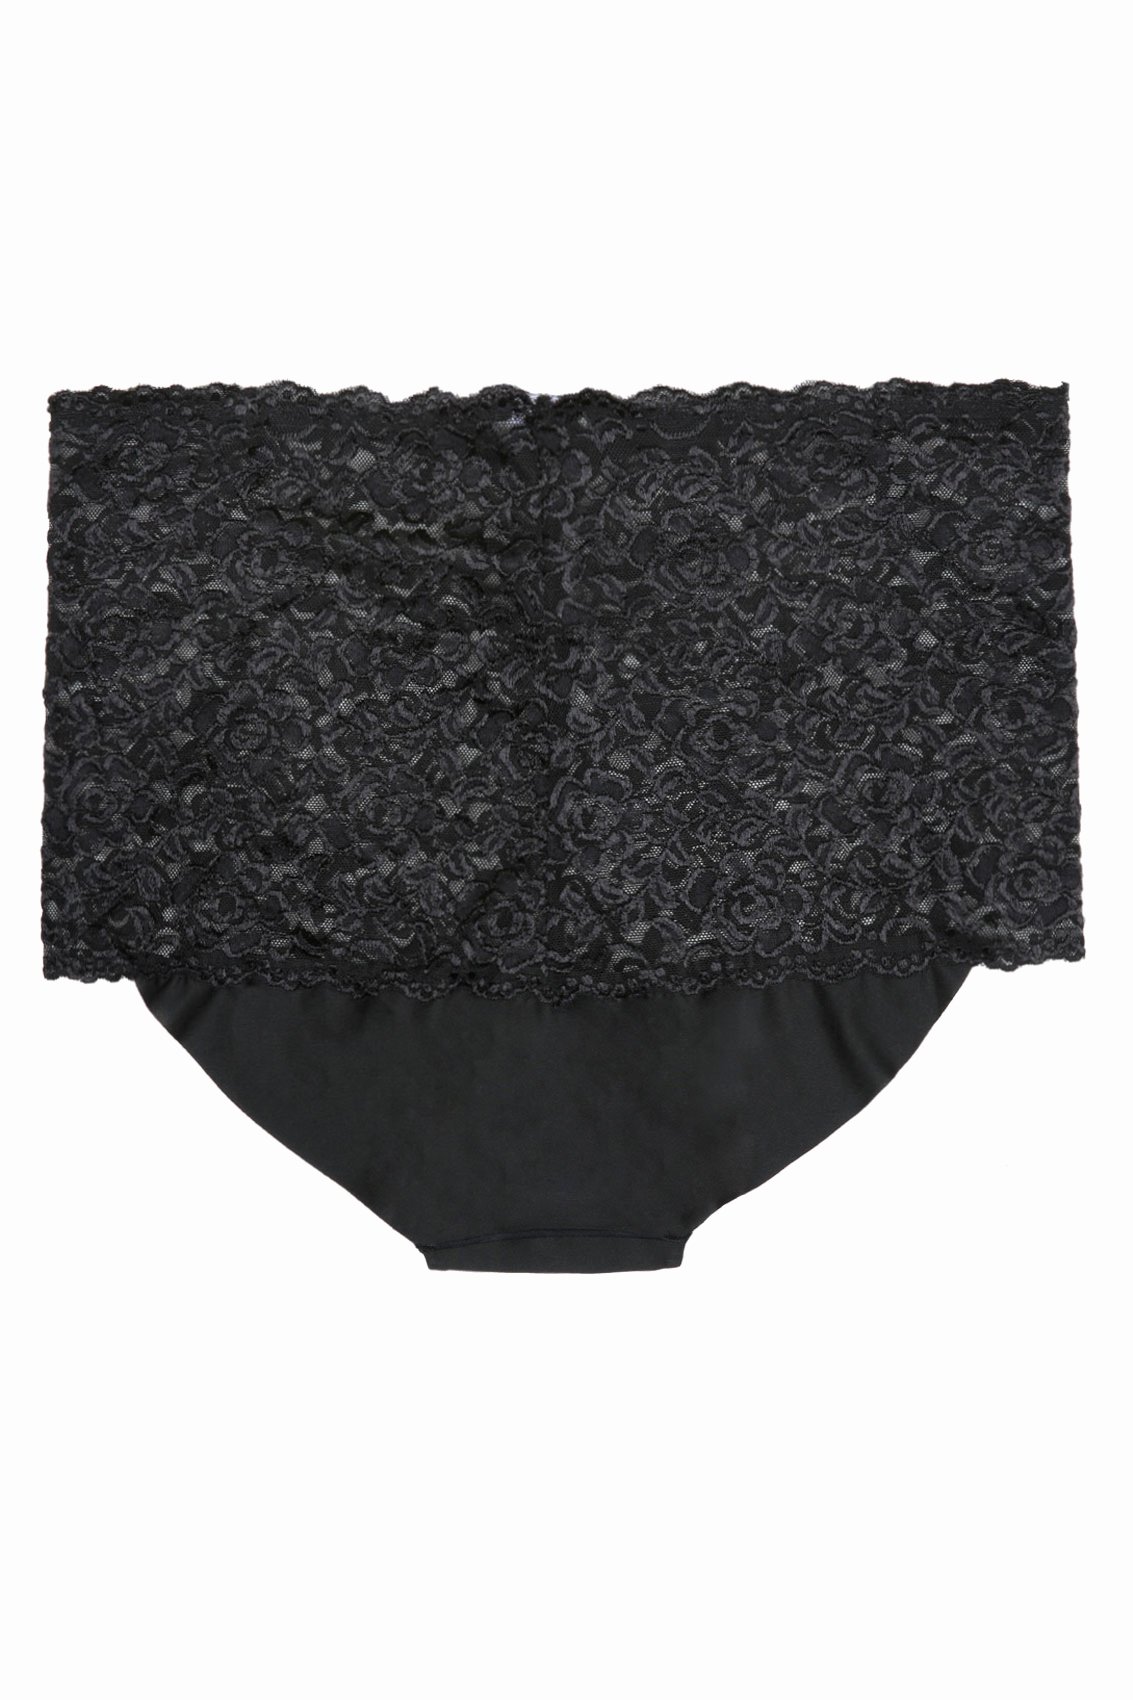 No Refunds Policy Template New Black Shine Lace Shorts